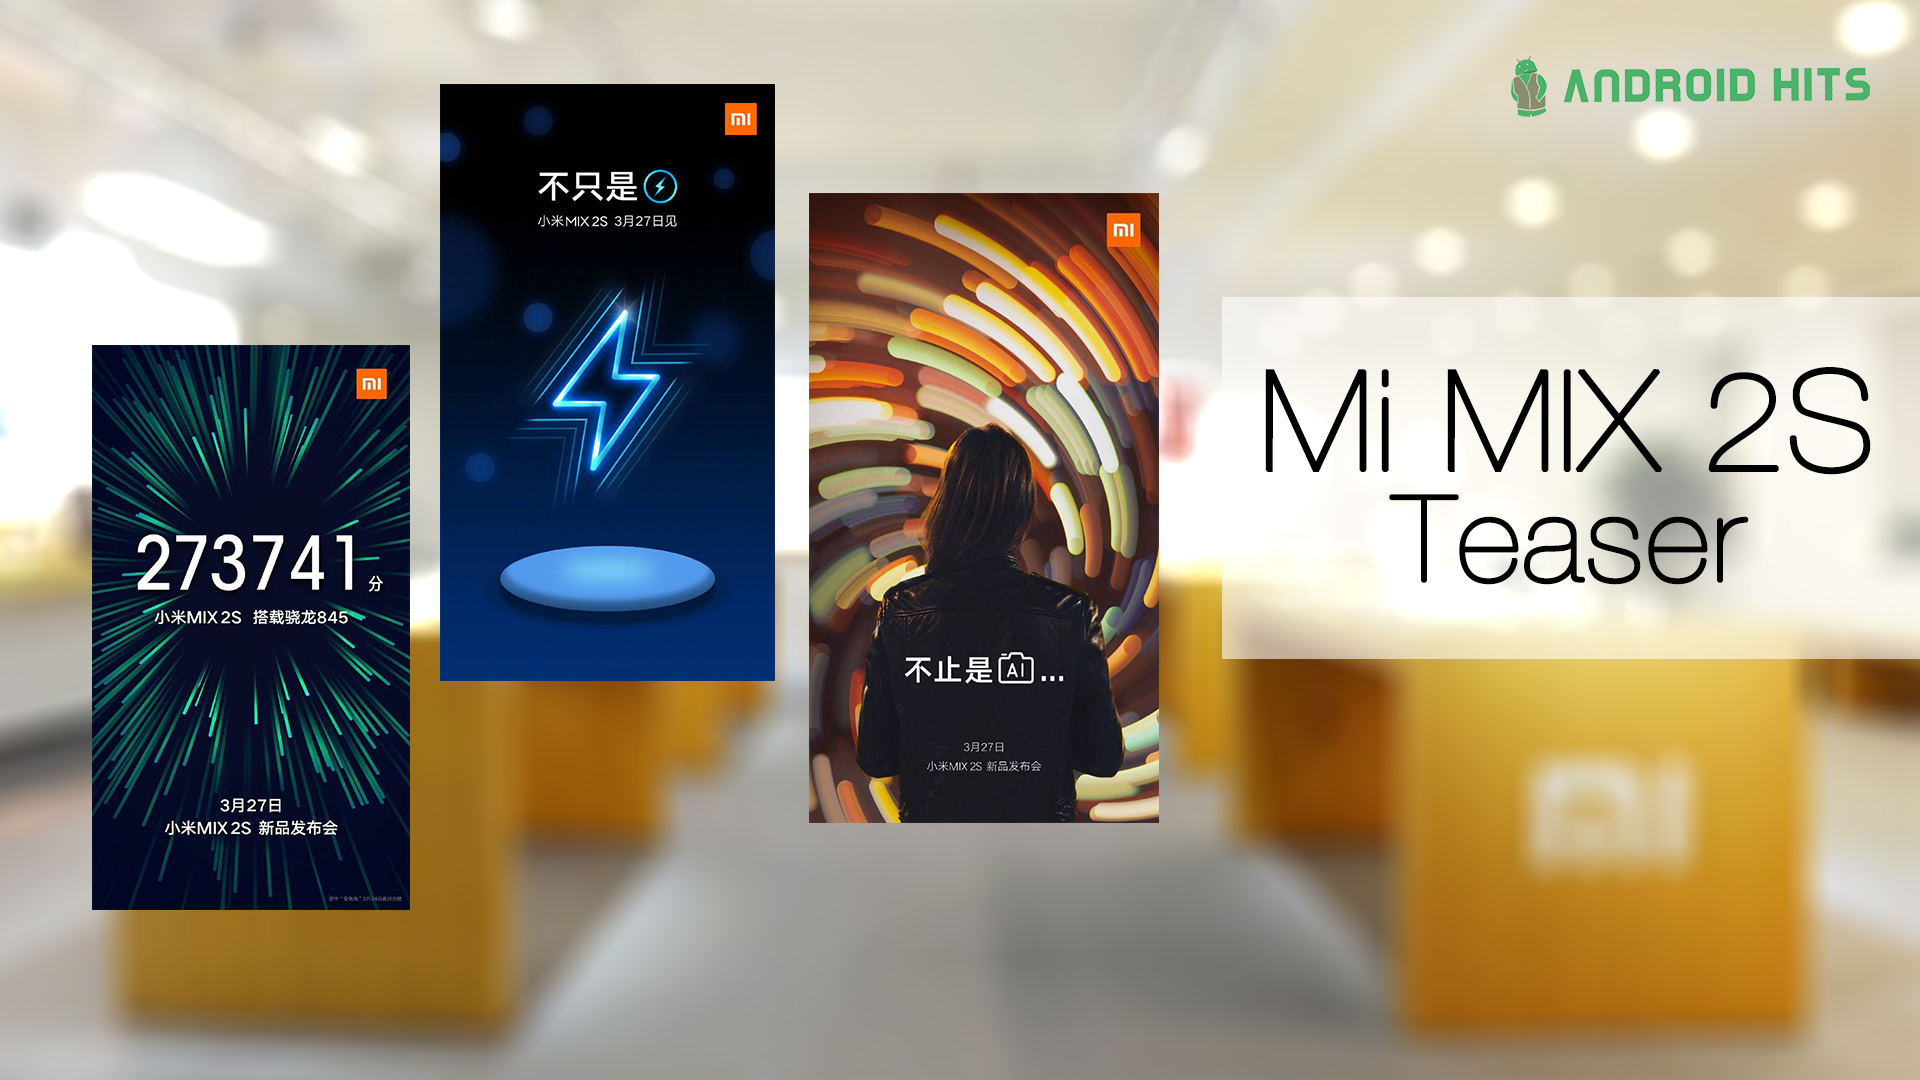 Xiaomi teases Mi MIX 2S with wireless charging, AI-dual camera and Snapdragon 845 2